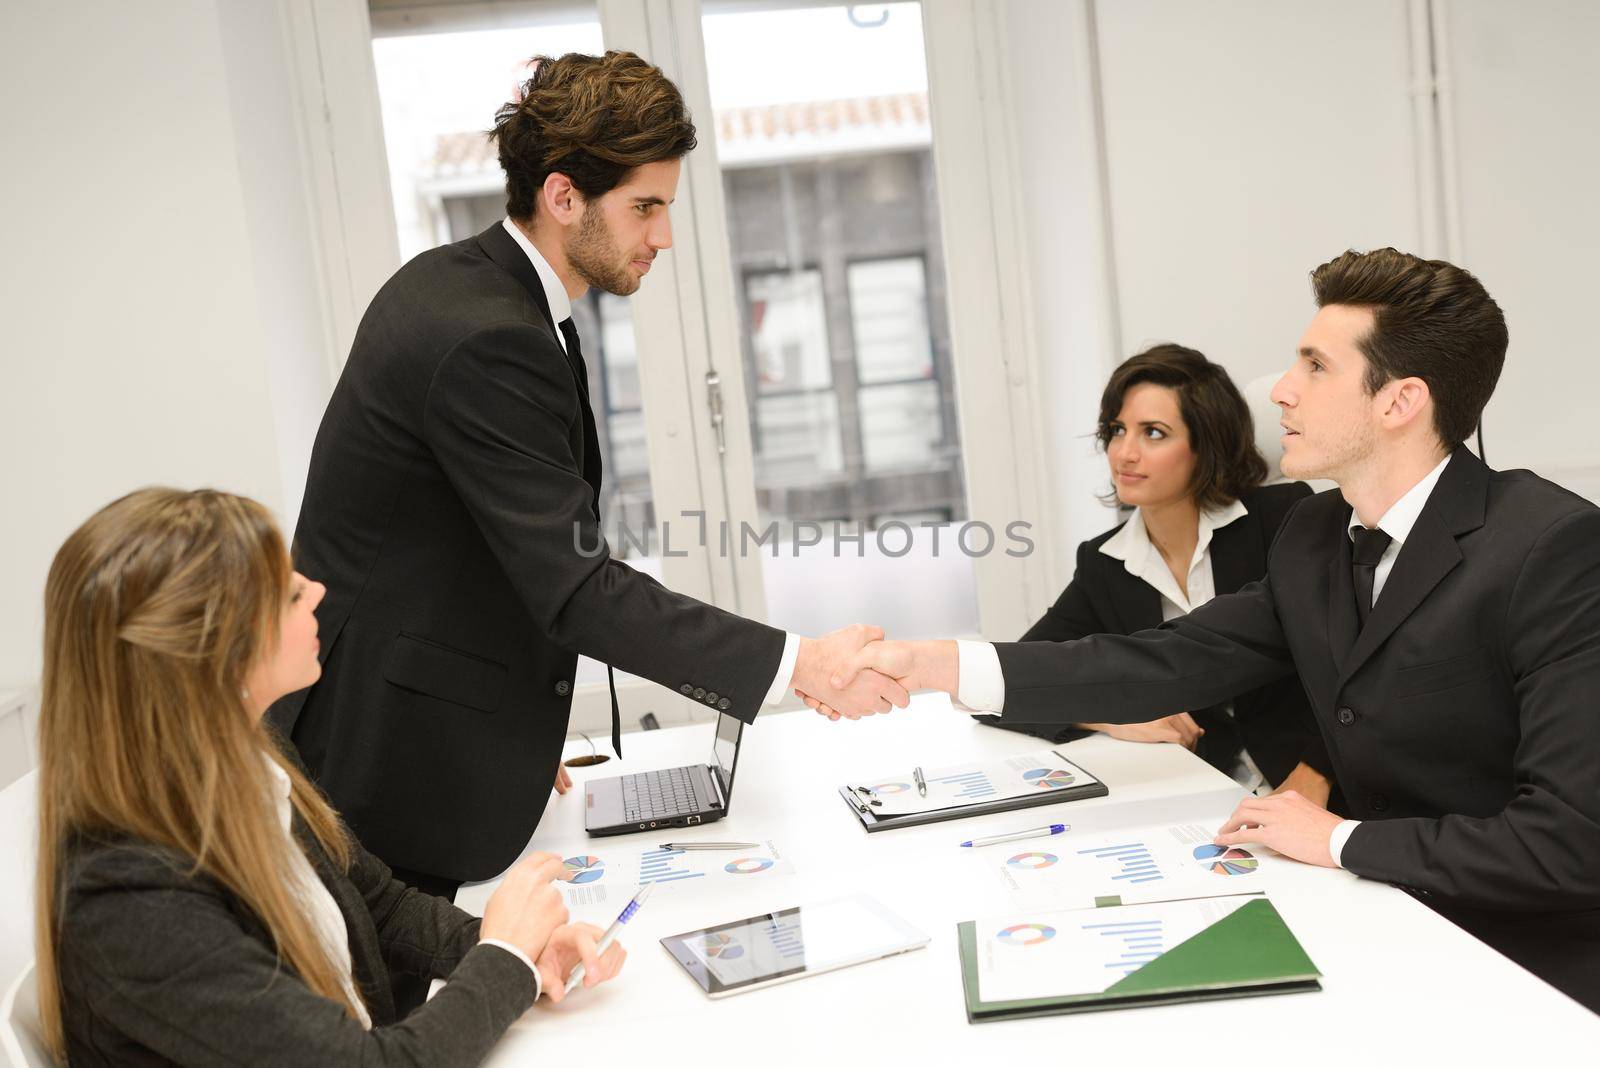 Four business people shaking hands, finishing up a meeting